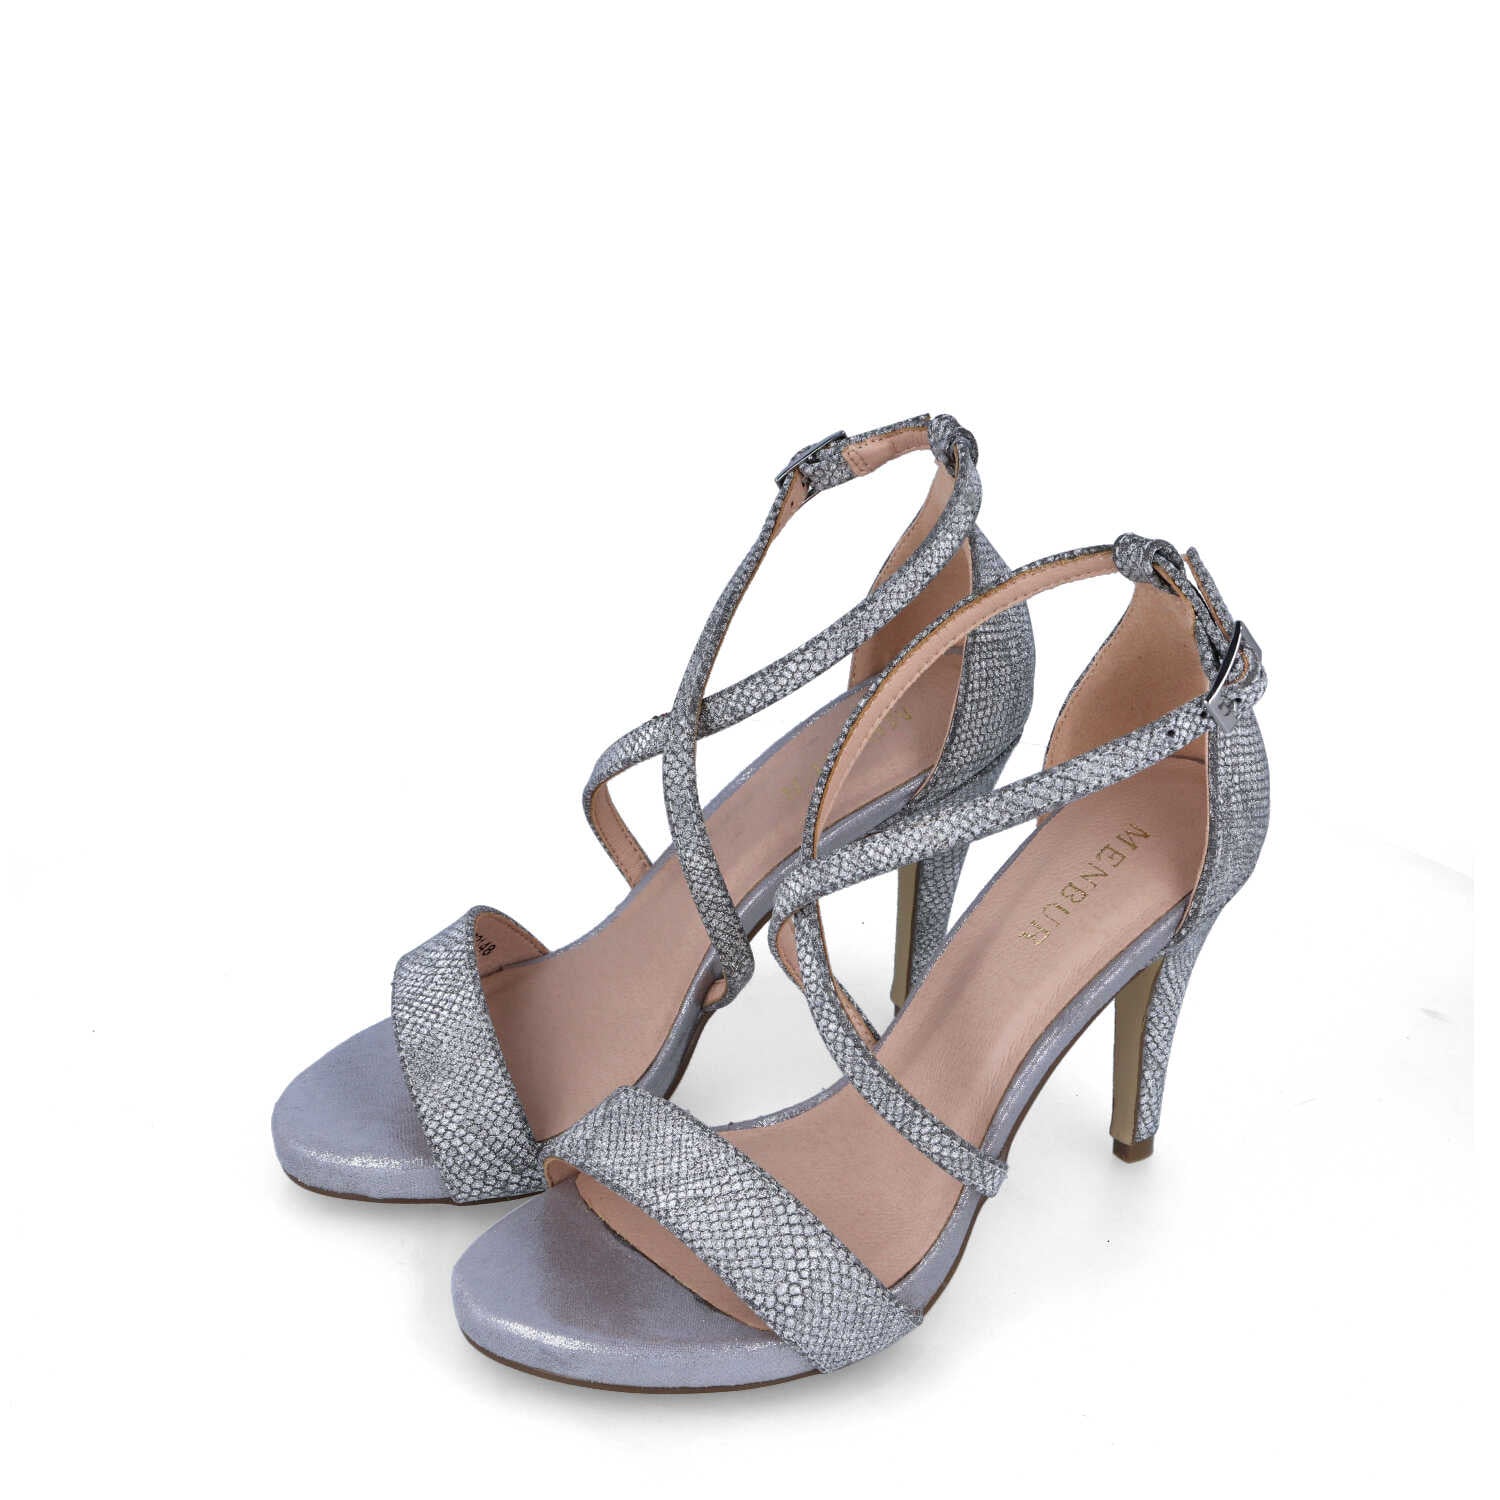 22148 Sandals - Silver